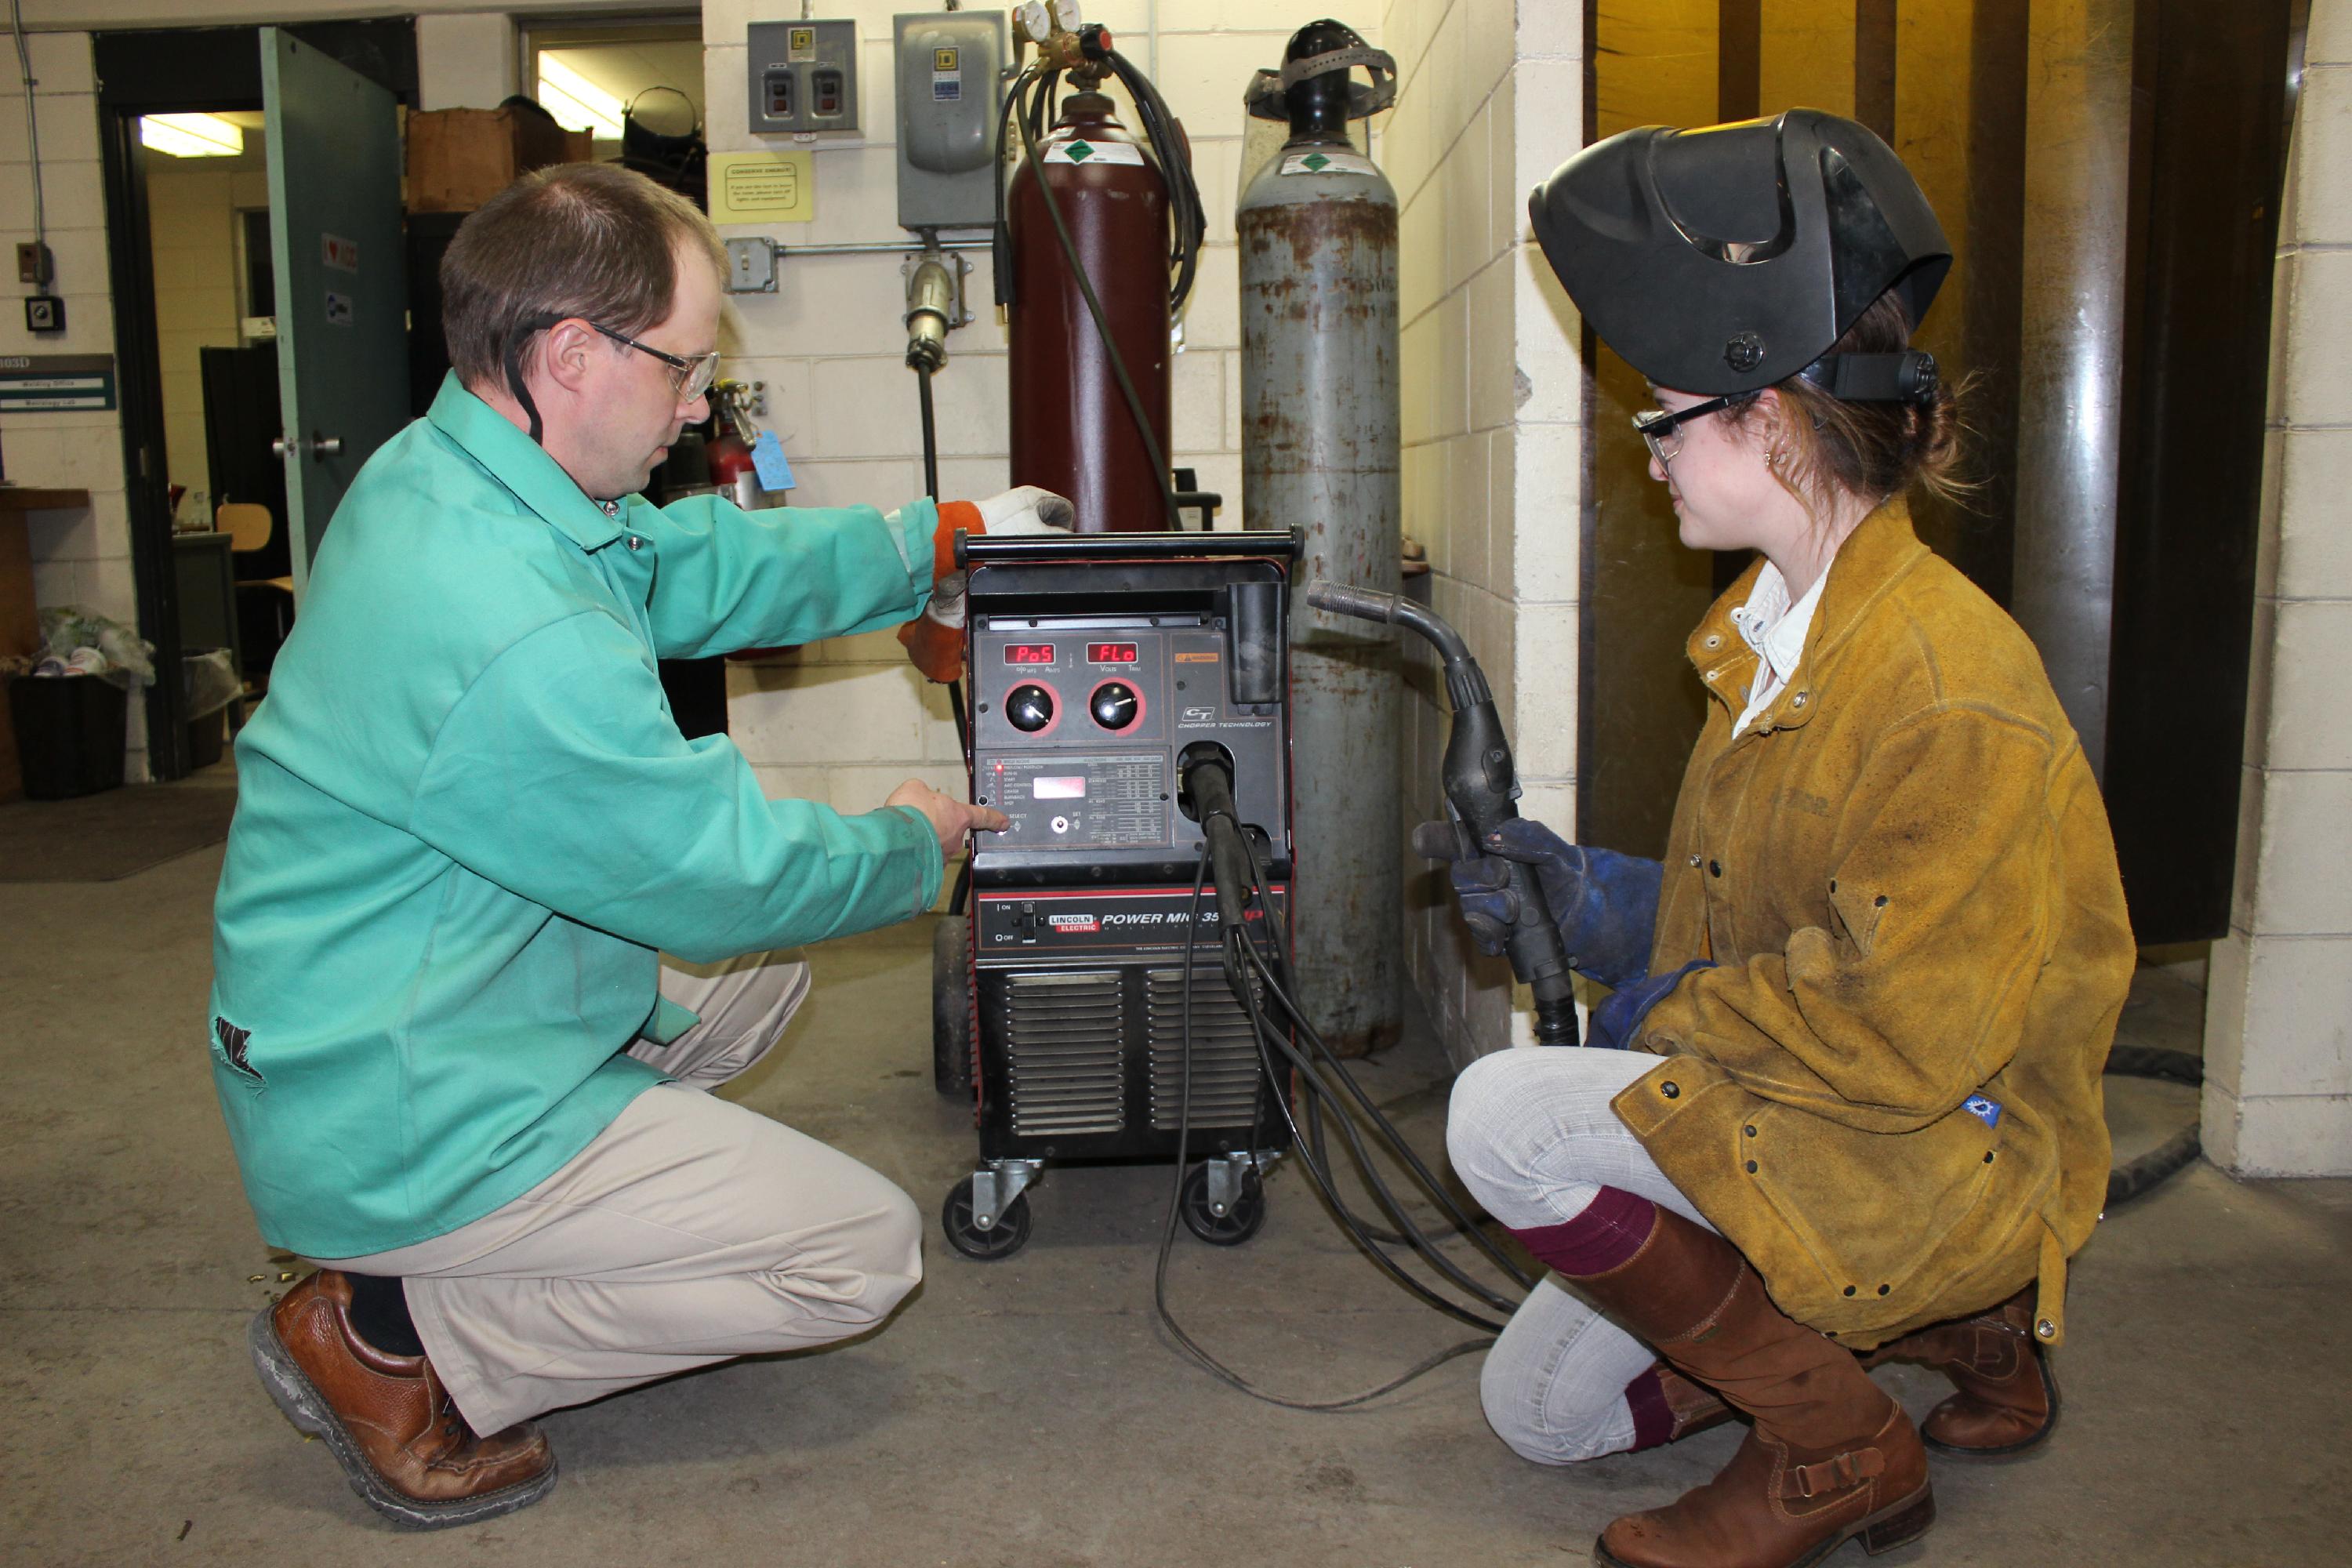 Instructor and student working with welding equipment